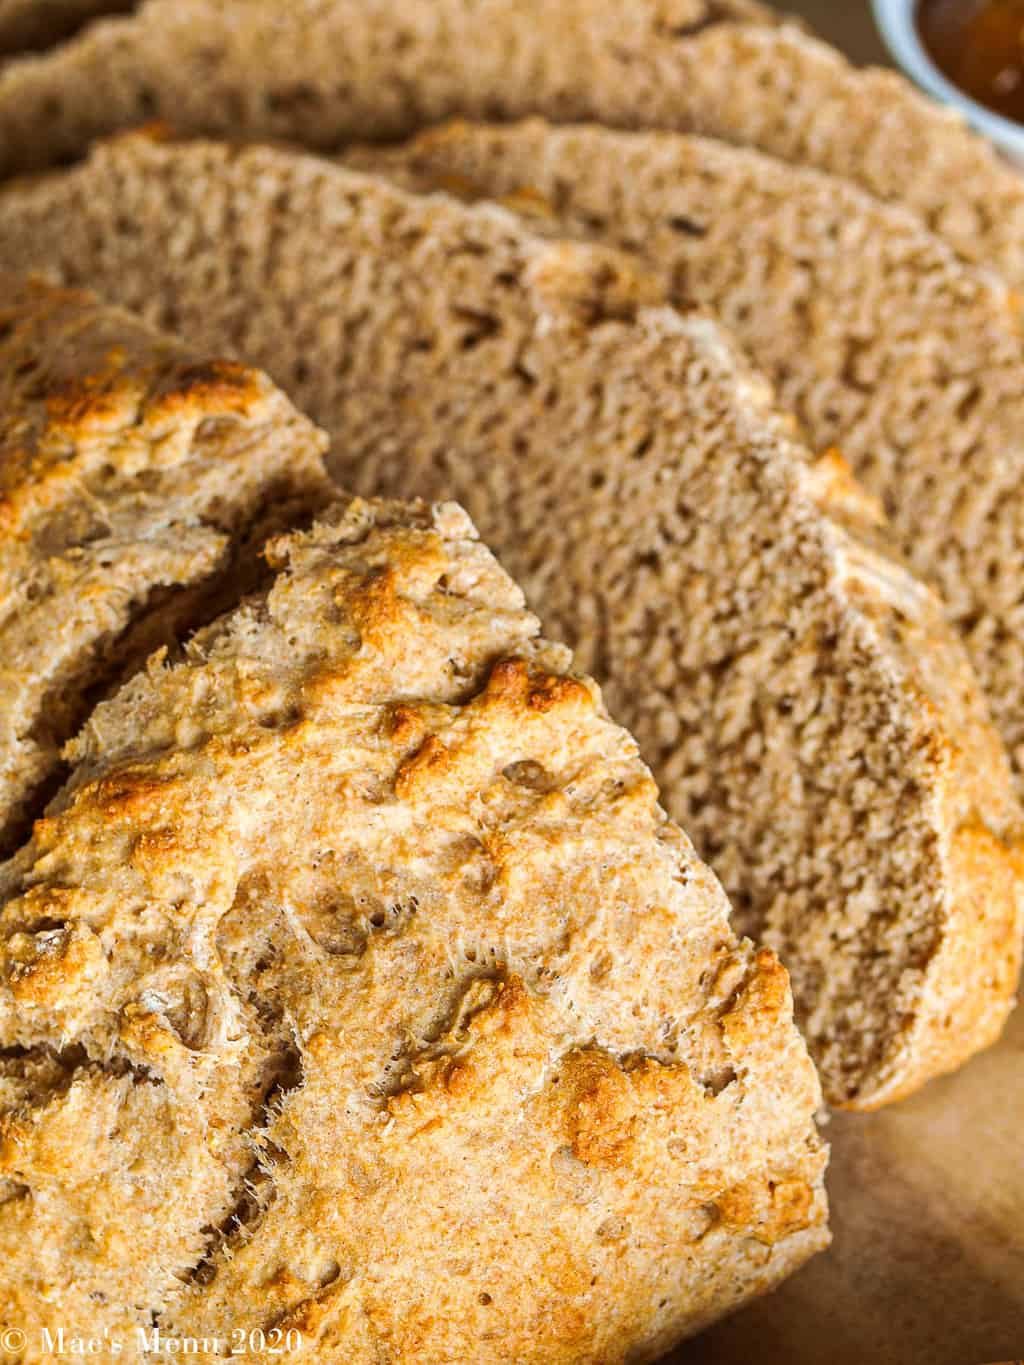 An up-close shot of a sliced loaf of beer bread